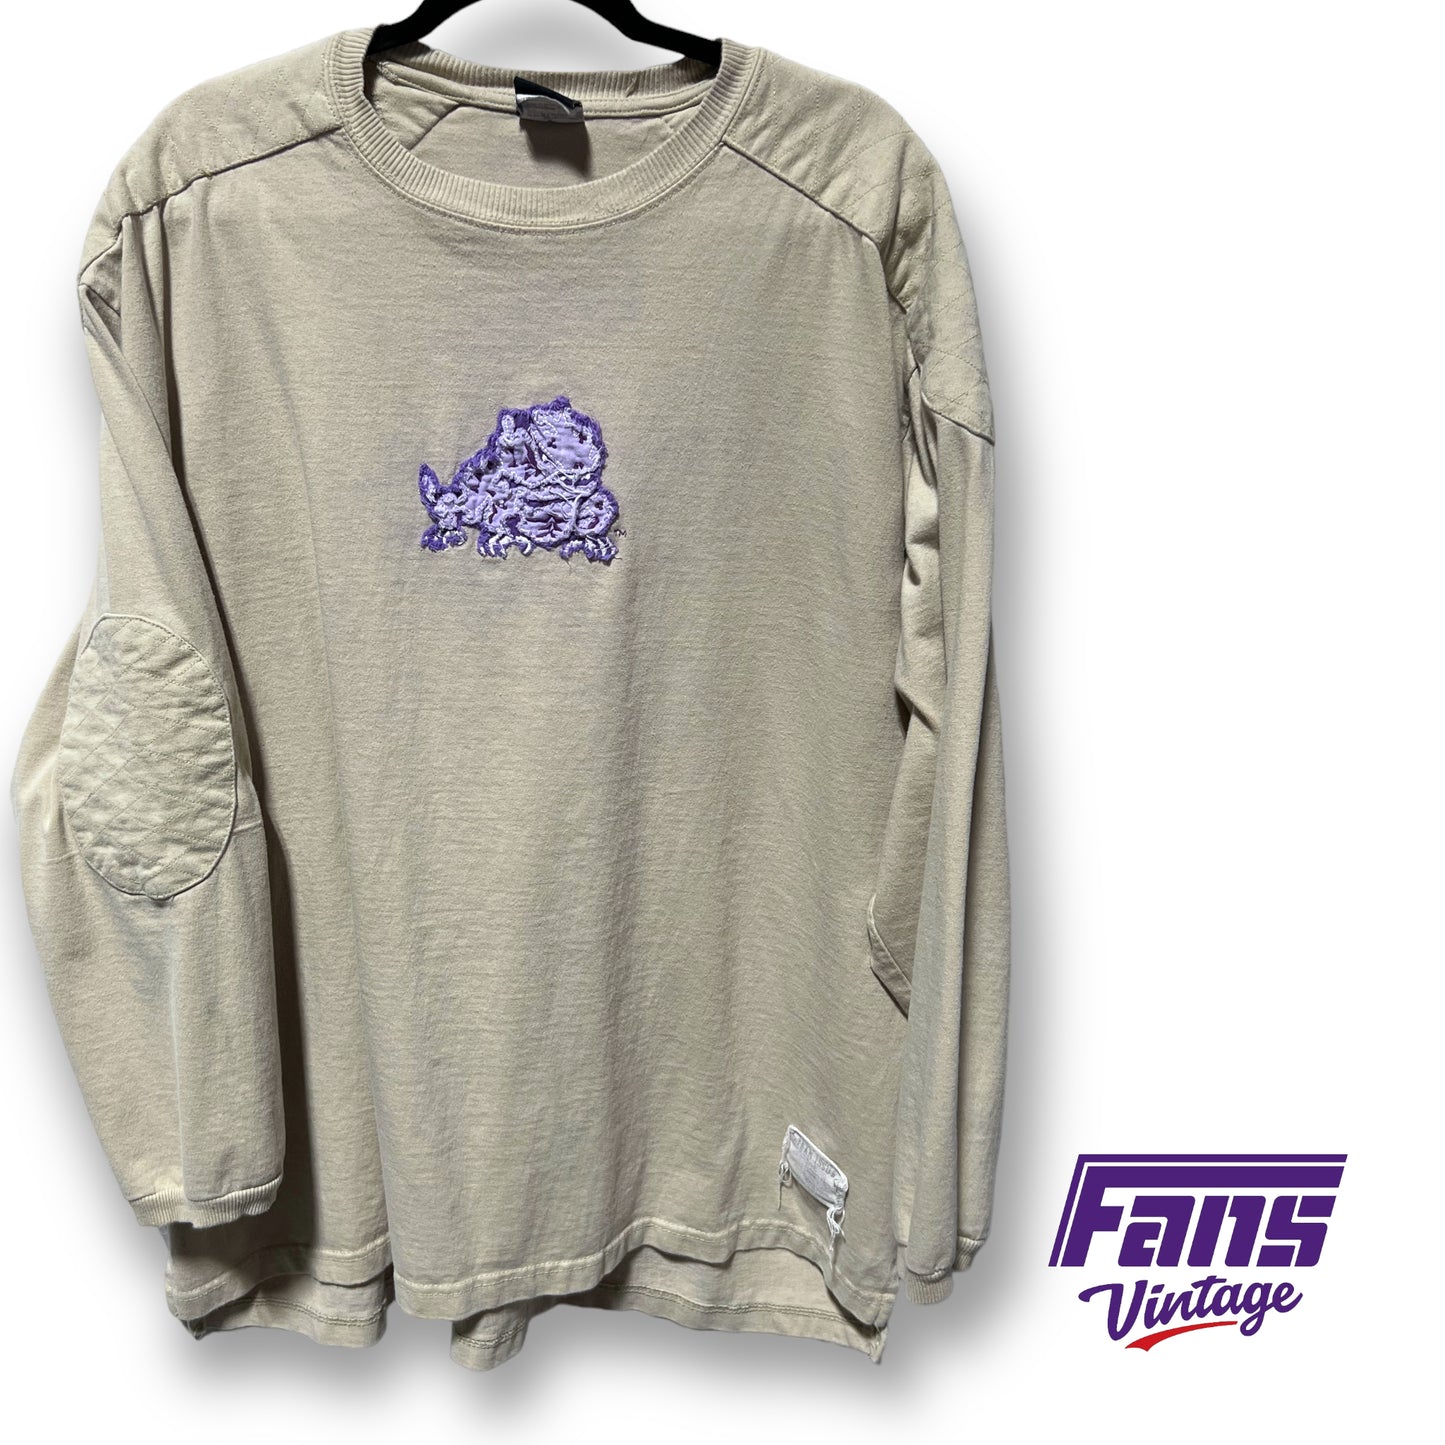 RARE! Y2K Vintage TCU throwback football jersey style sweatshirt - awesome details!